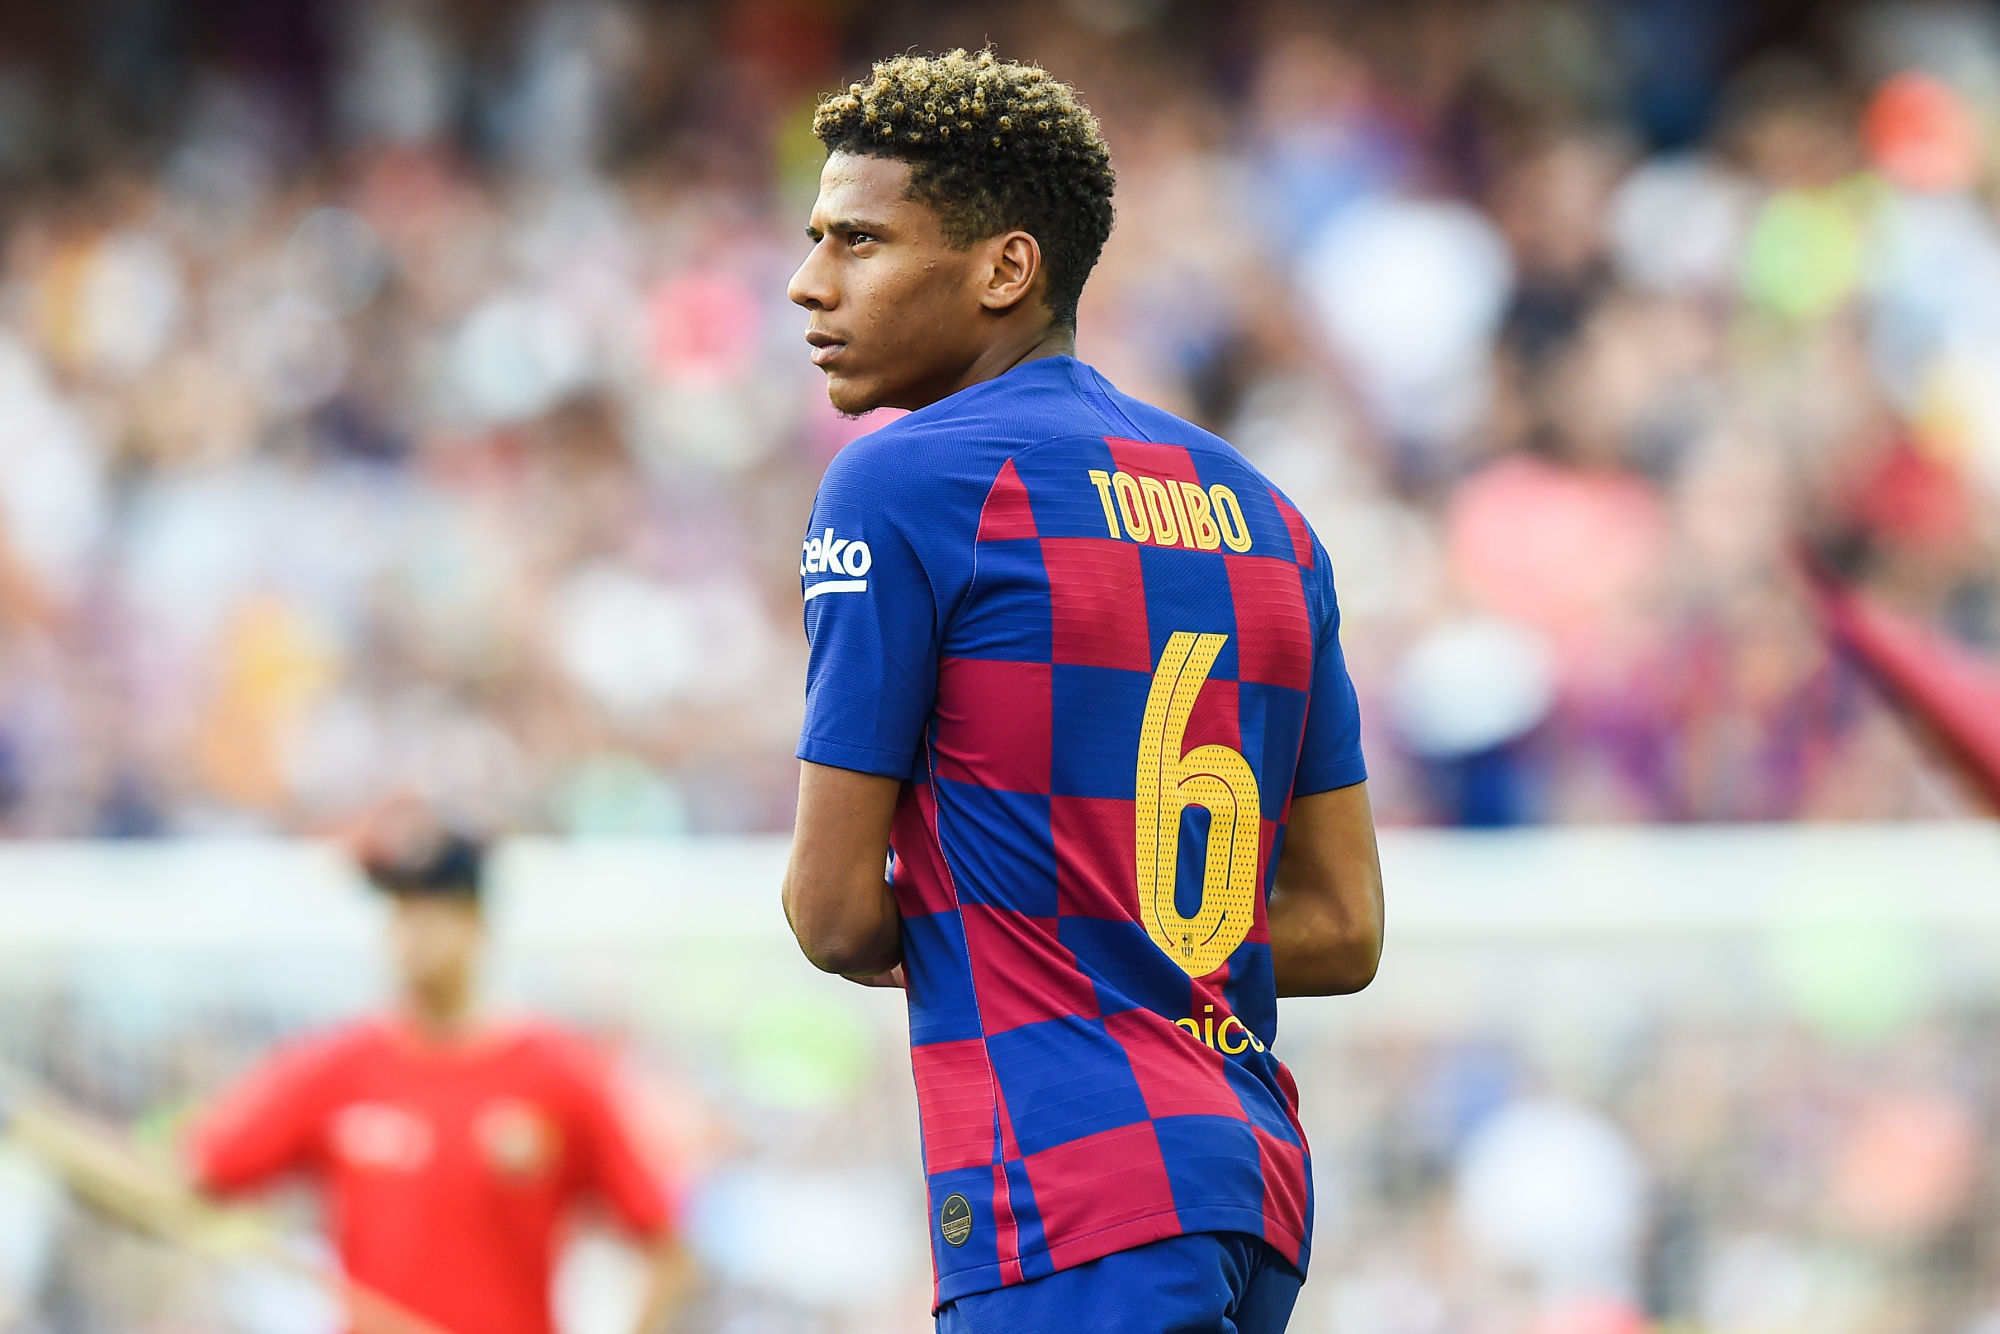 Jean Clair Todibo of Barcelona during the Trofeu Joan Gamper match between FC Barcelona and Arsenal FC at the Camp Nou stadium on August 04, 2019 in Barcelona, Spain .
Photo : SUSA / Icon Sport